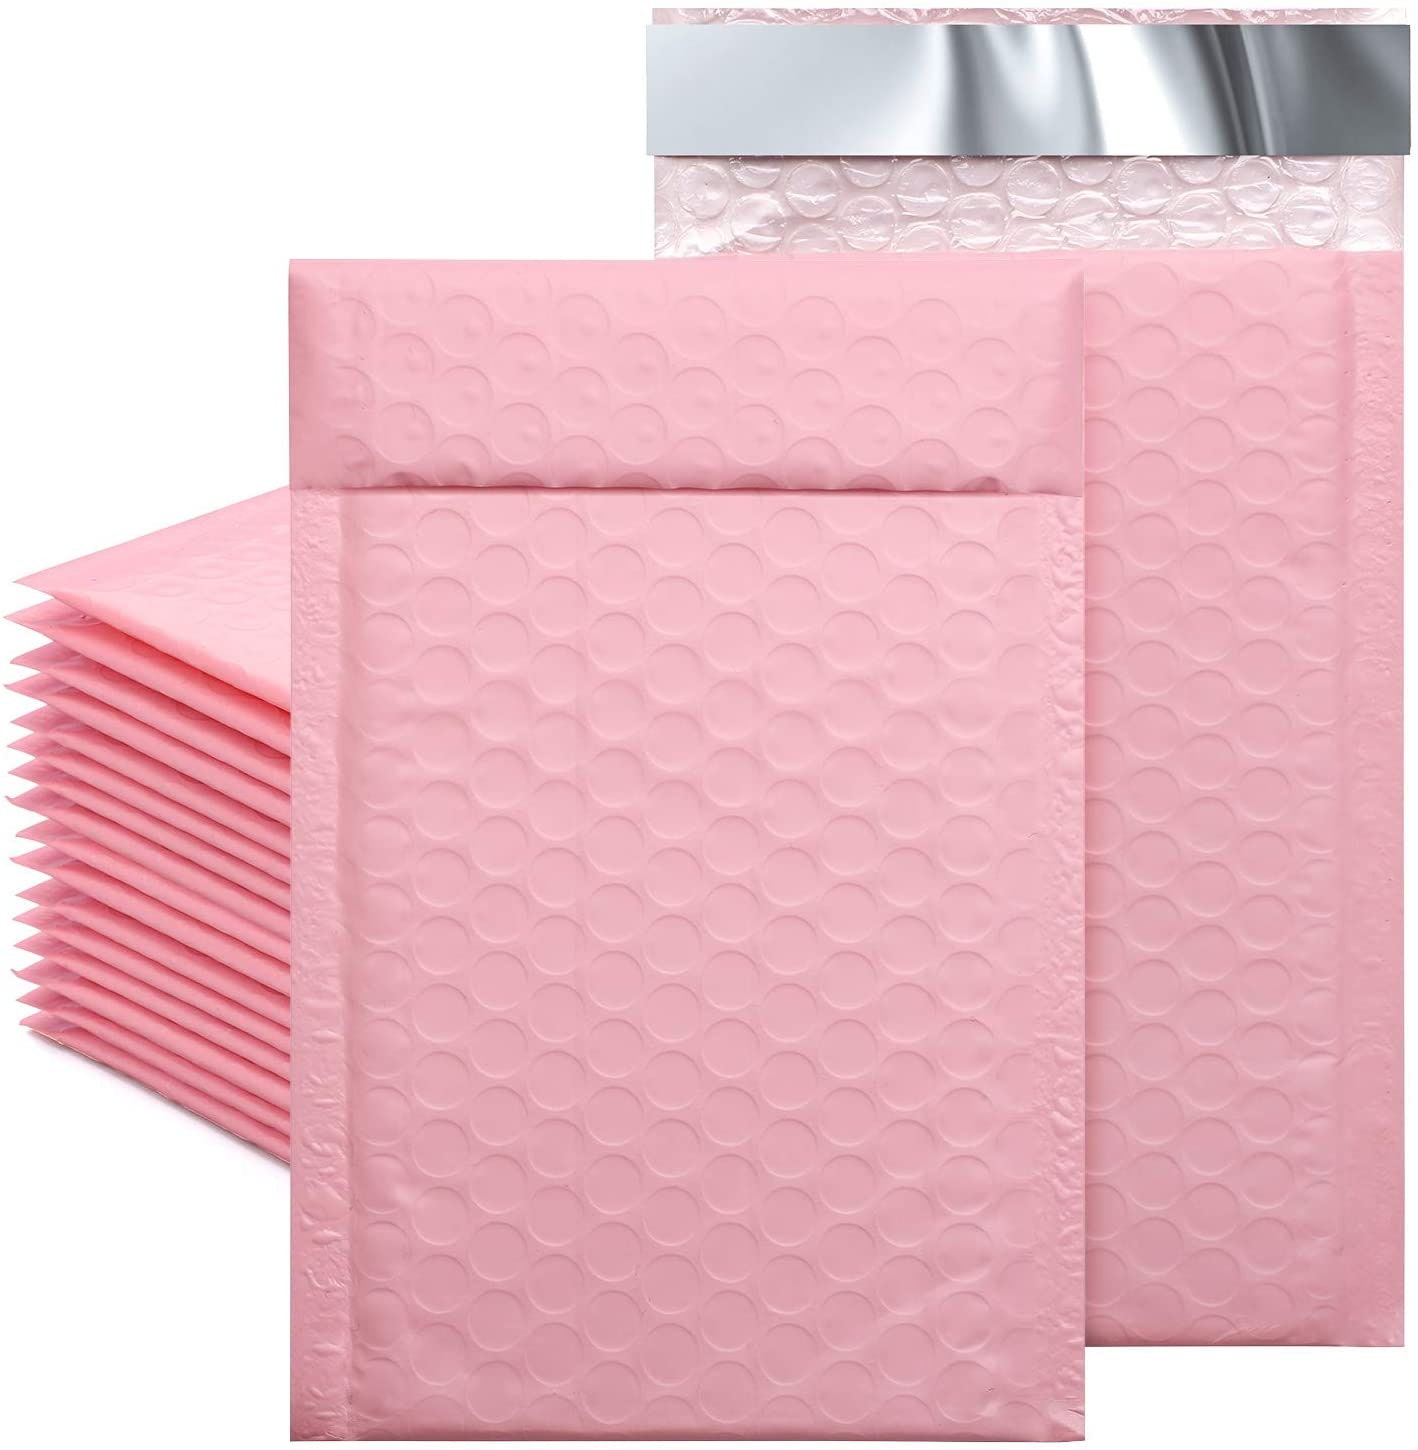 6x9 Pink  Poly Bubble Mailer Padded Envelope Shipping Bag 50,100,250 Details about   #0 6x10 